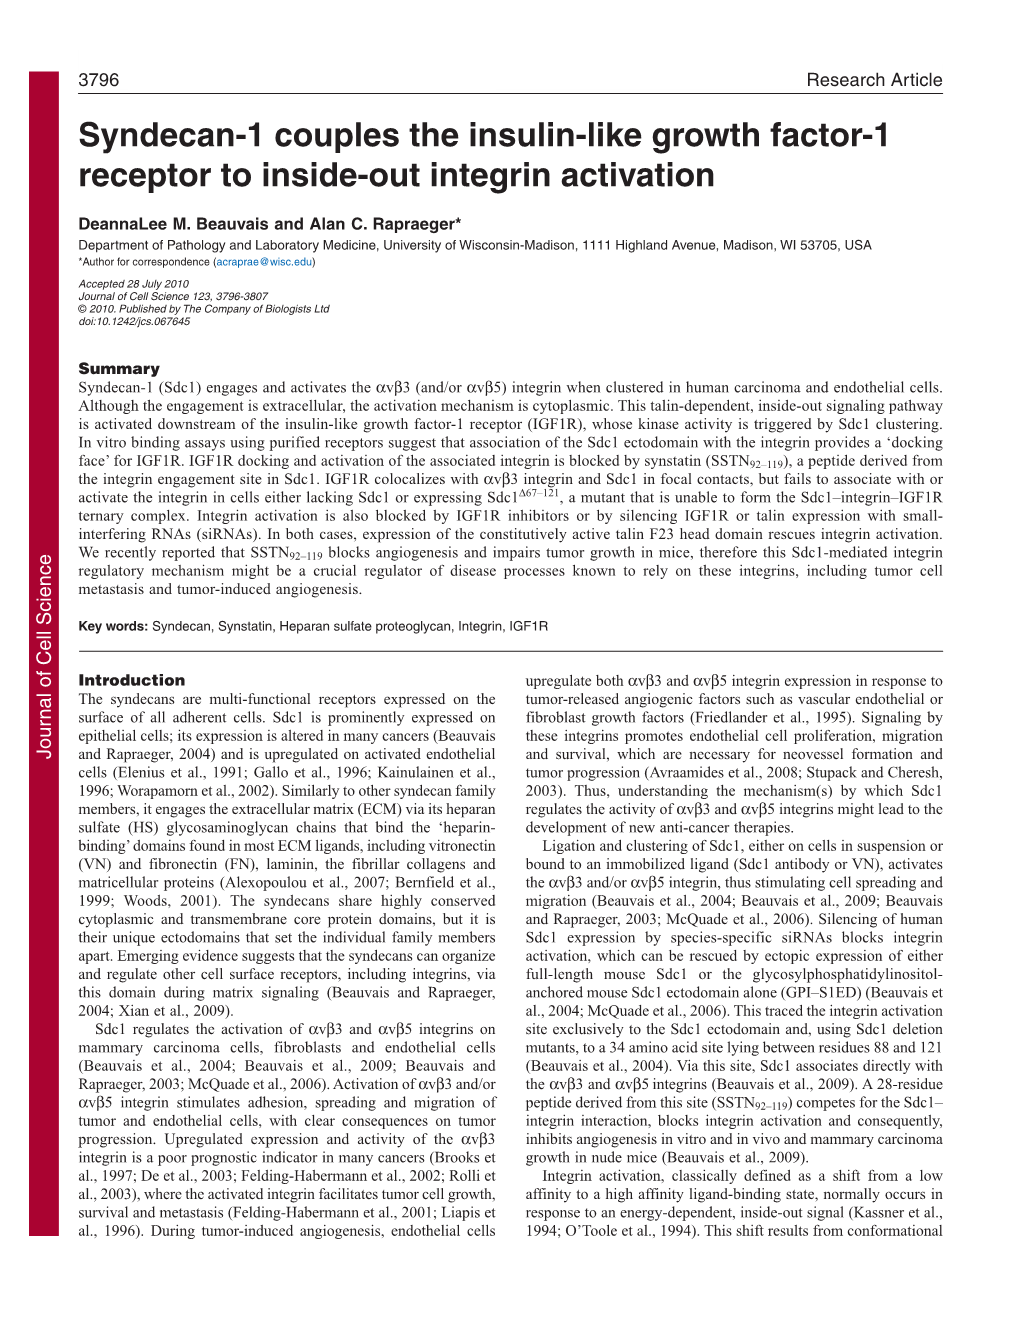 Syndecan-1 Couples the Insulin-Like Growth Factor-1 Receptor to Inside-Out Integrin Activation